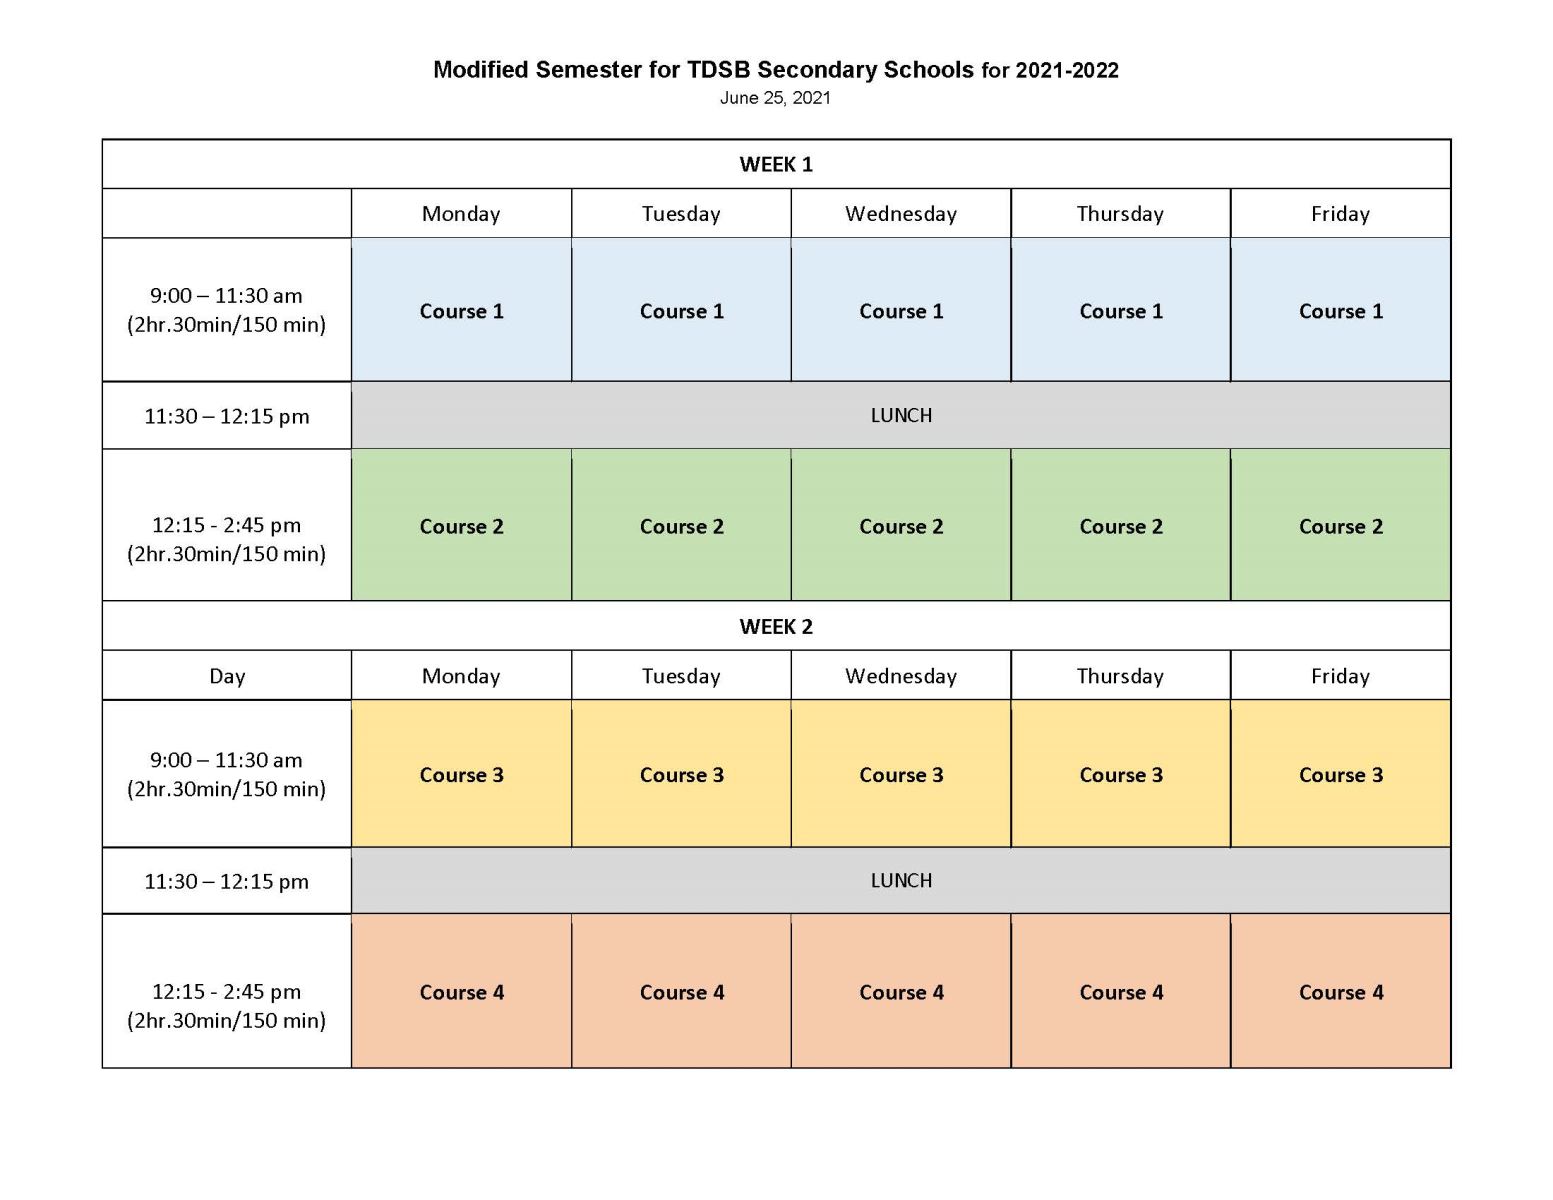 2021_06_25 - Modified Semester Schedule for Secondary 2021-22_v2